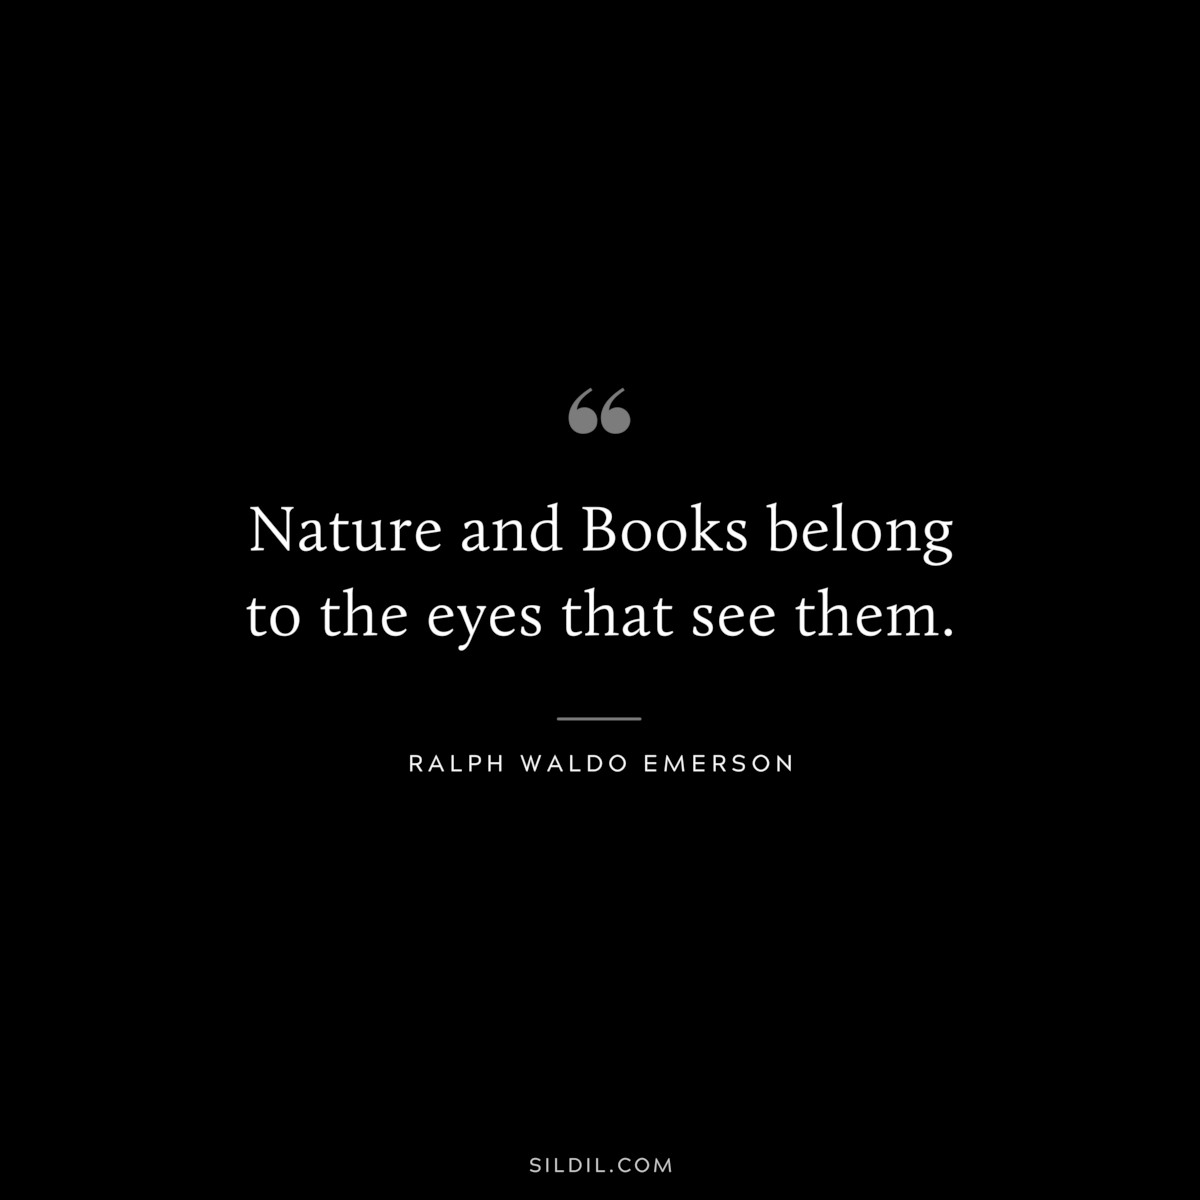 Nature and Books belong to the eyes that see them. — Ralph Waldo Emerson